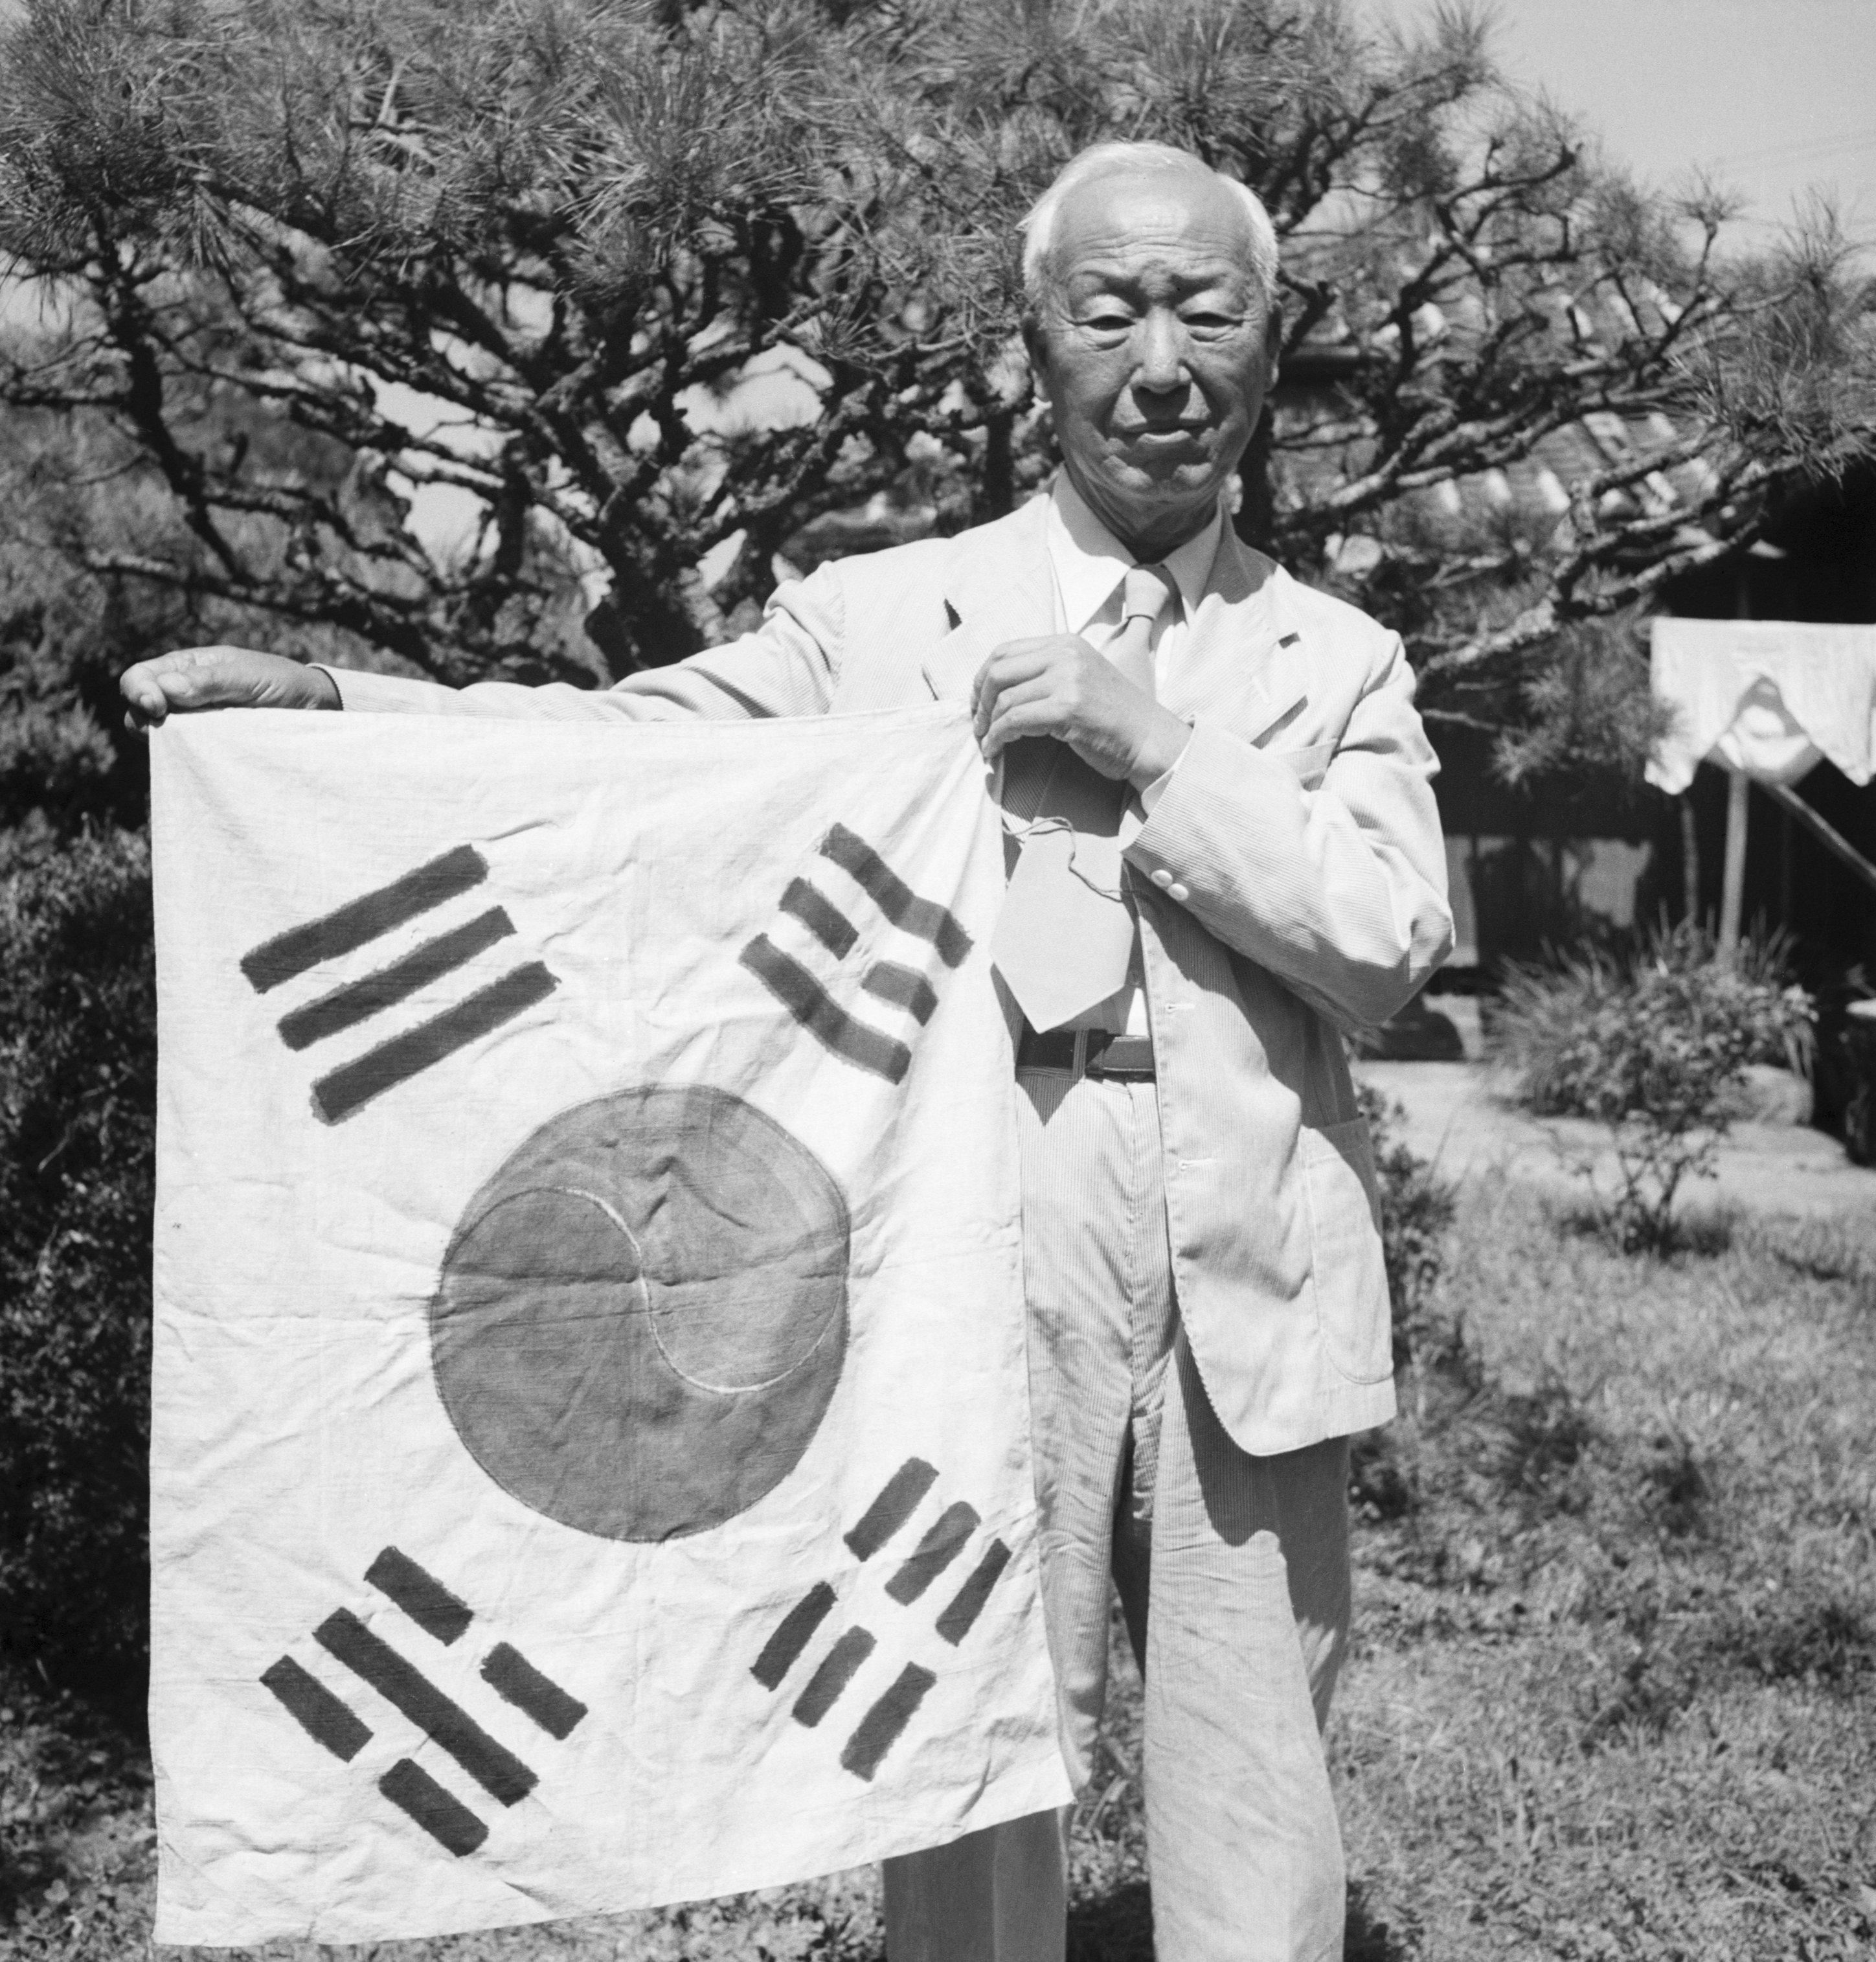 South Korea’s first president, Syngman Rhee. The Birth of Korea is a polarising and commercially successful biopic that portrays him as “a good person”, contrary to popular belief. Photo: Getty Images